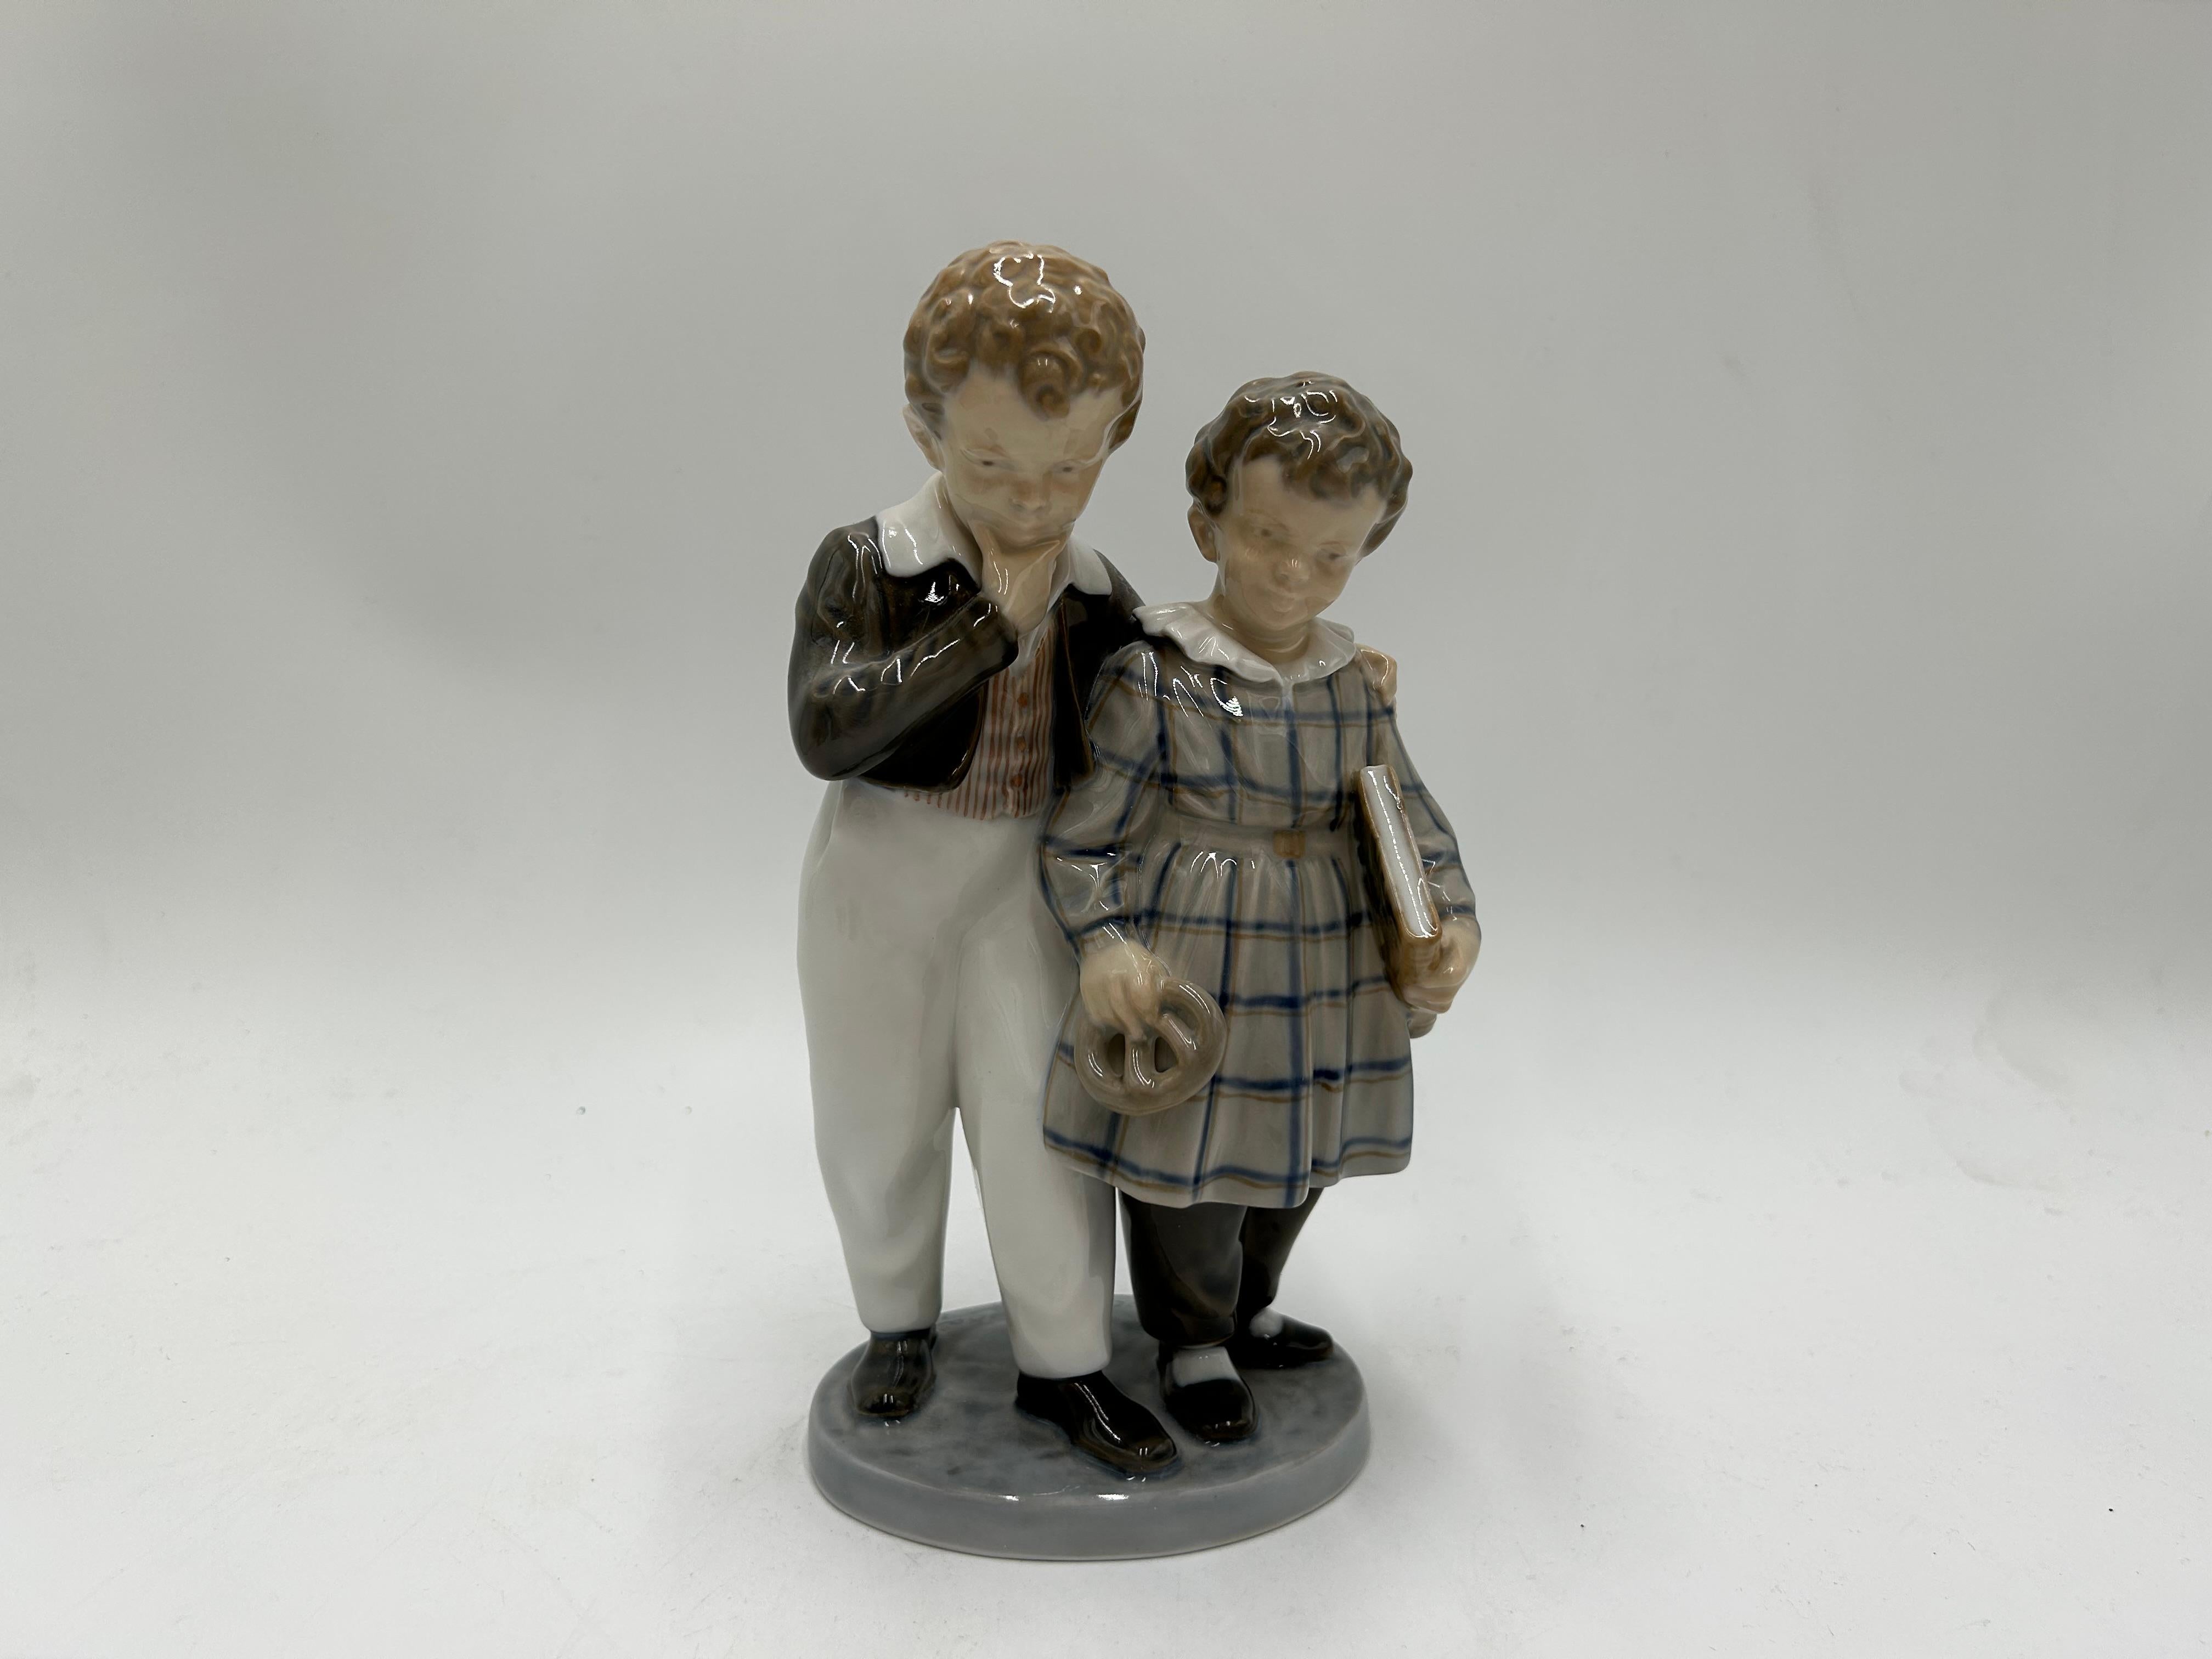 Porcelain figurine of children's siblings model #1761
Produced by the Danish manufacture Royal Copenhagen
Mark used in 1961.
Very good condition, no damage
Measures: Height: 21cm
width: 11cm
depth: 8cm.